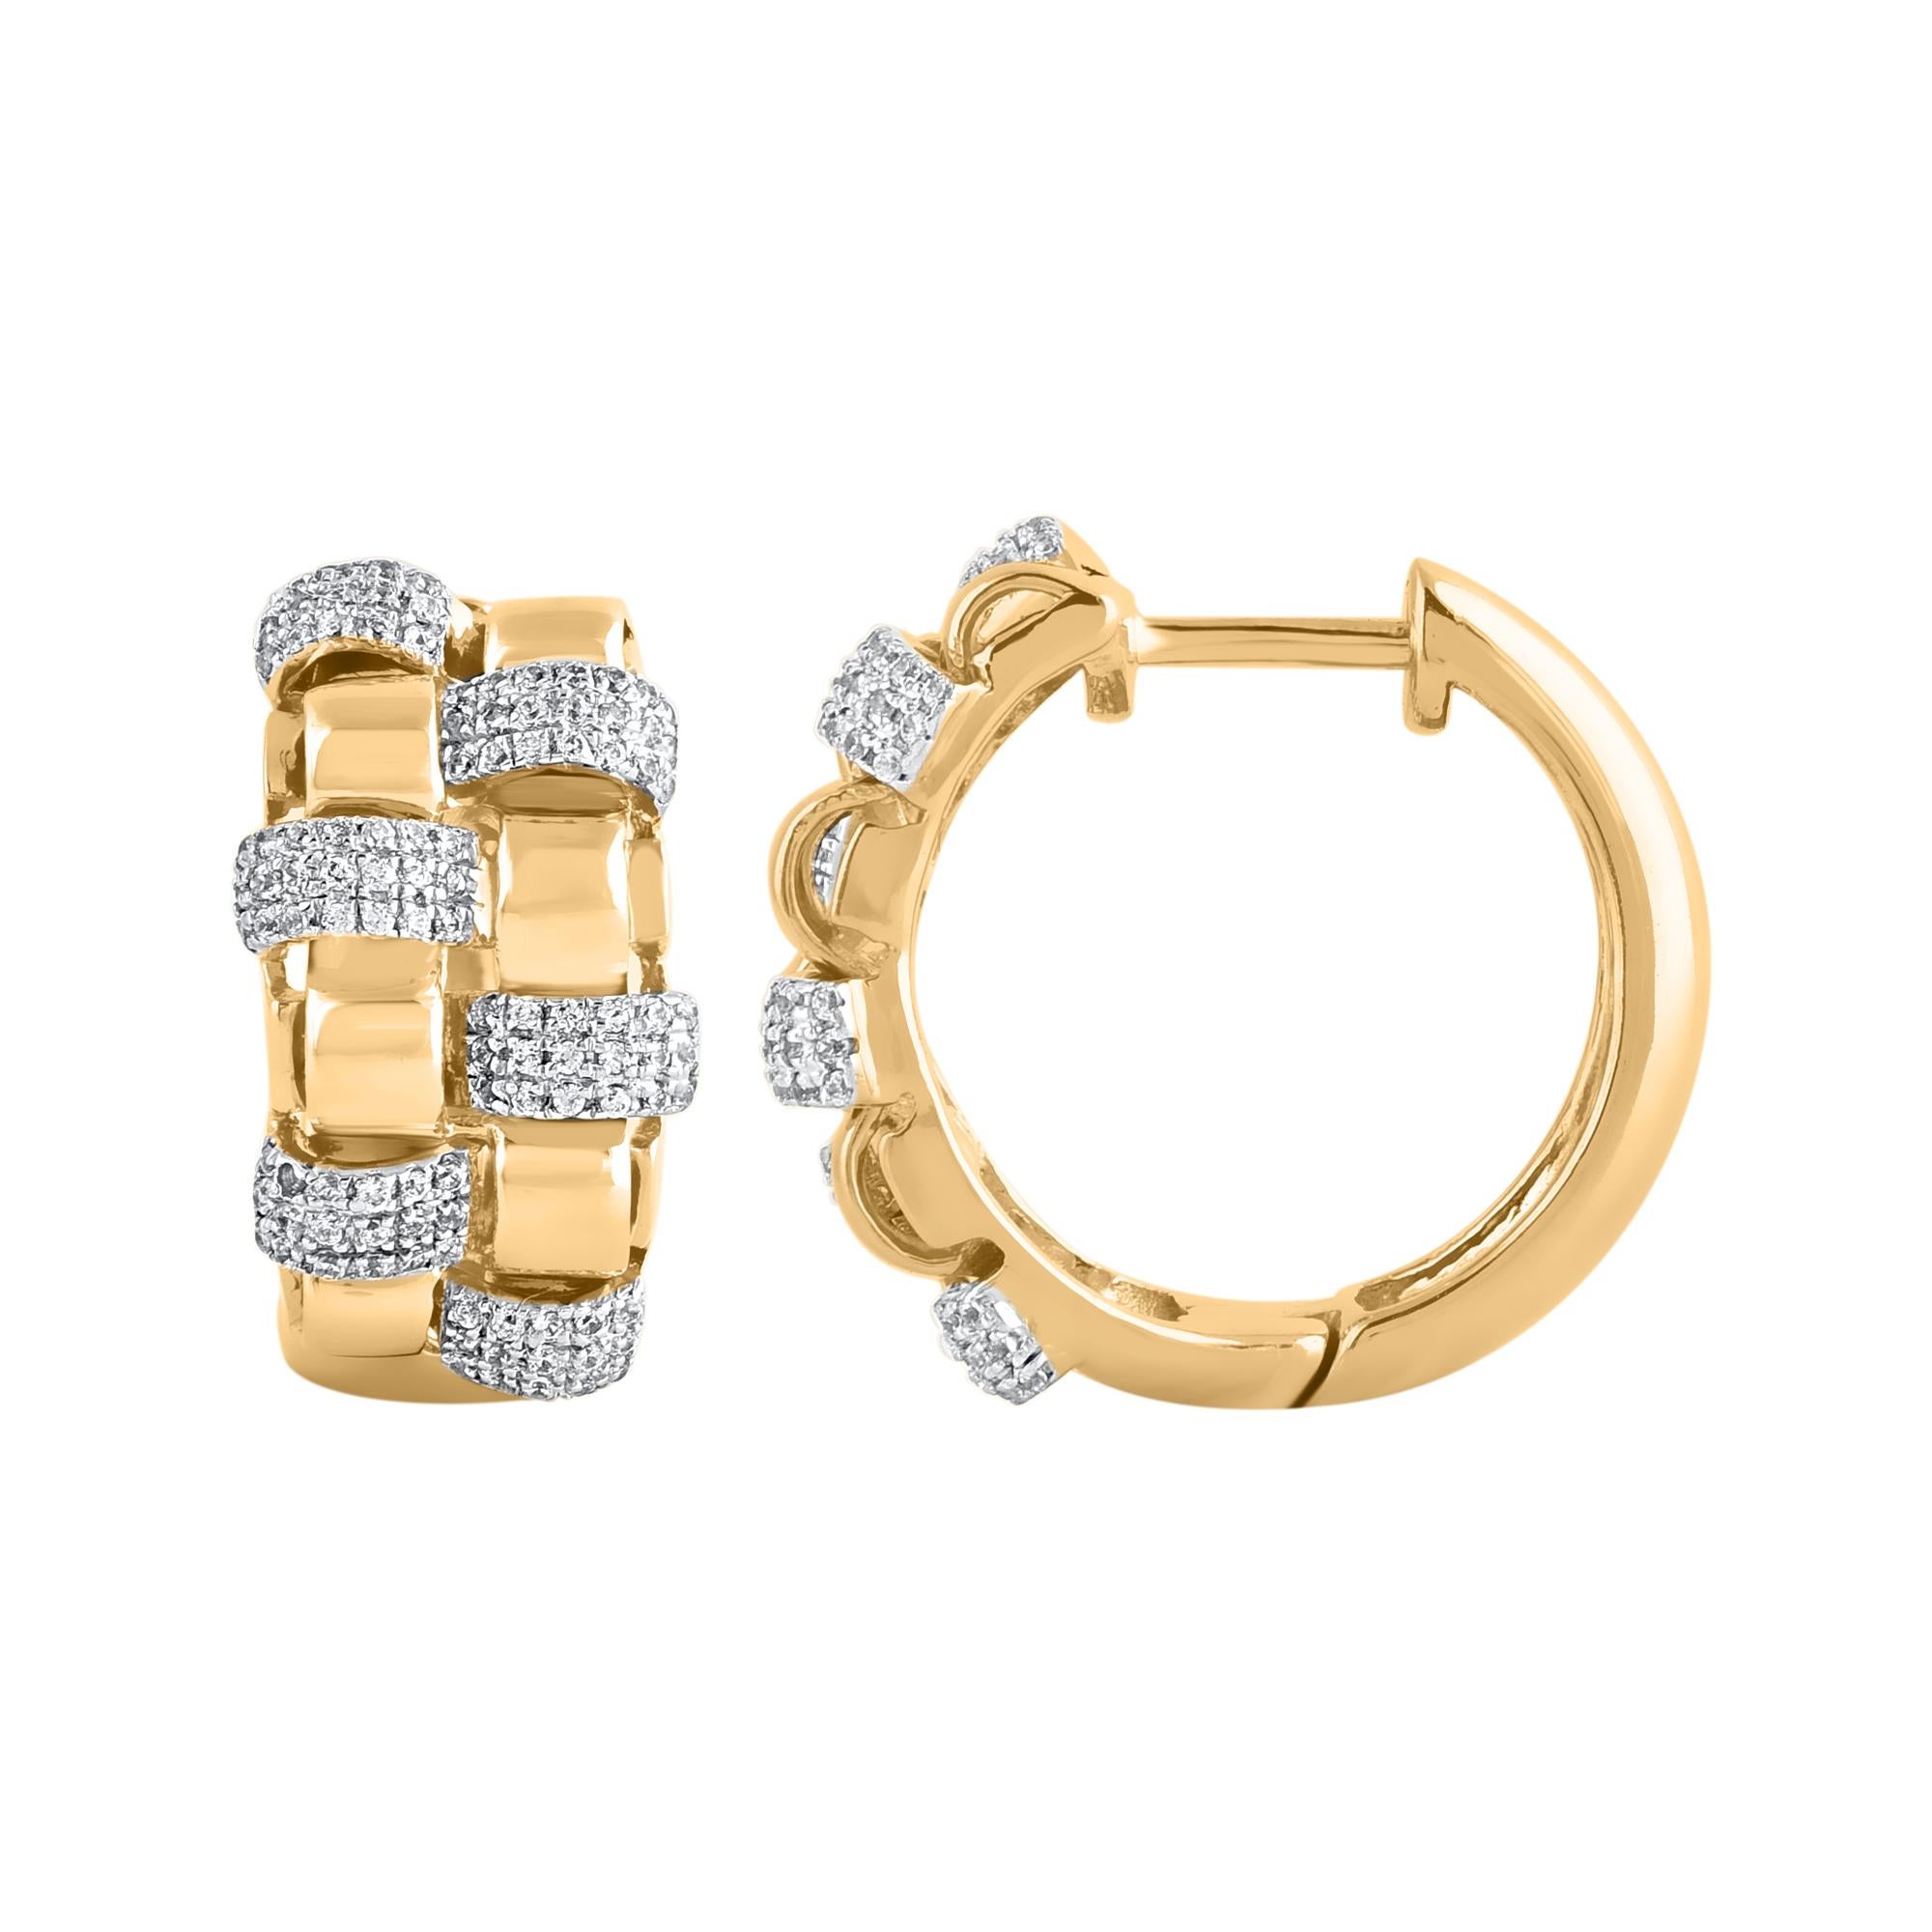 Perfect for daily wear, these diamond huggie hoop earrings are designed to delight. Crafted in 14 karat yellow gold with 216 single cut round diamond in prong setting. Total diamond weight is 0.50 carat. These earrings secure with hinged back. The